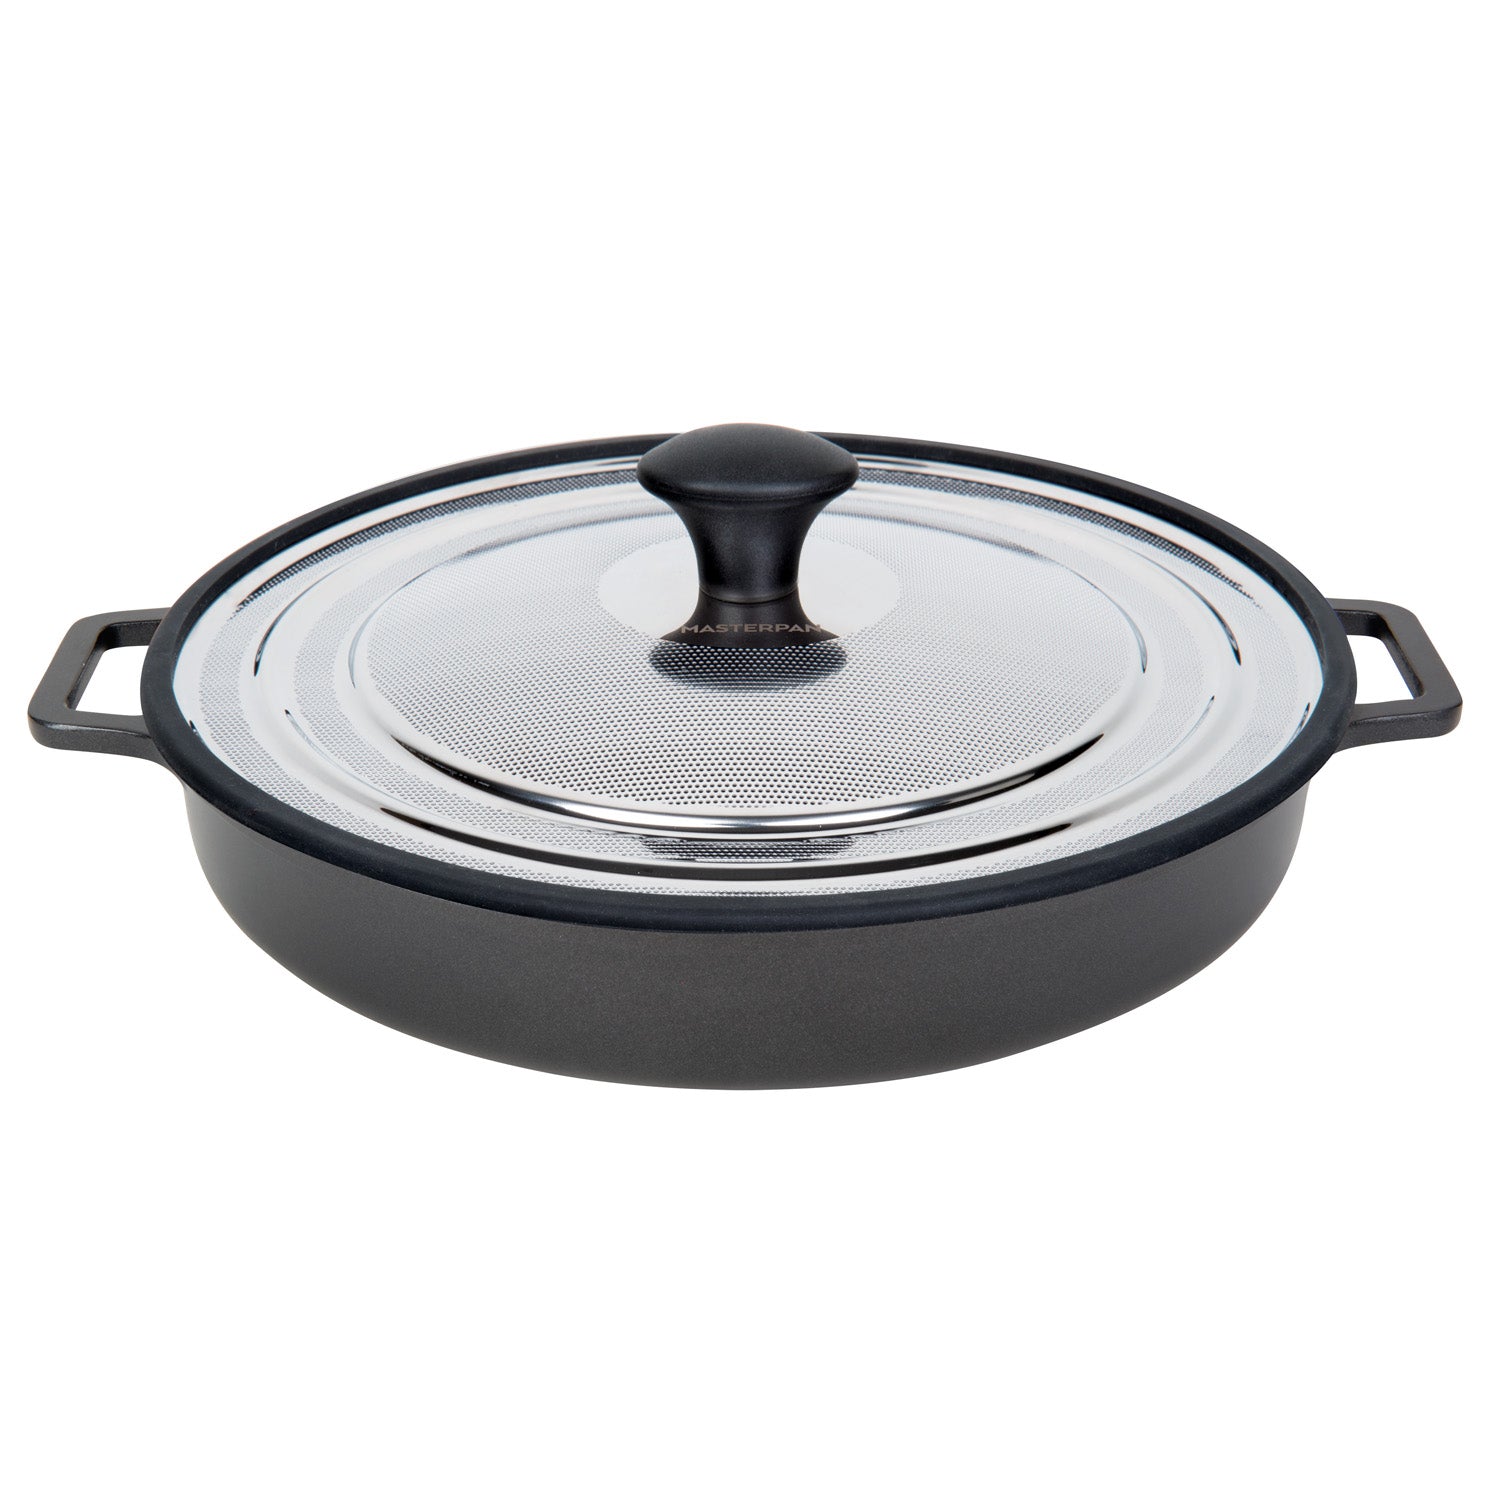 MasterPan Stovetop Oven Grill Pan with Heat-in Steam-Out Lid, Black, 12